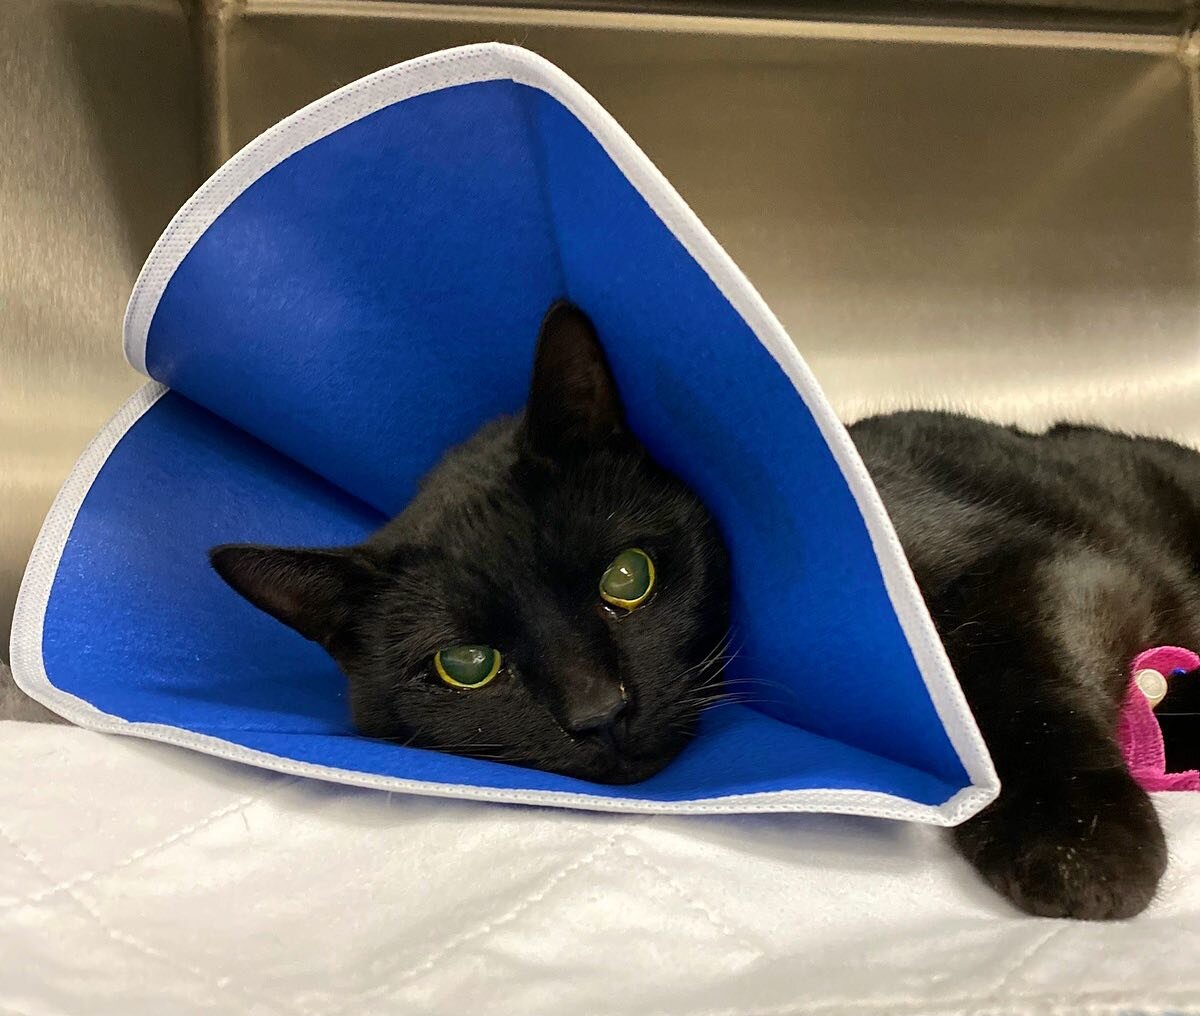 The excellent cat Timothy had to spend Christmas Eve and Christmas Day in the emergency vet hospital. He&rsquo;s home now and doing much better after a scary time. Thanks to @aecwatsontown for taking such good care of him